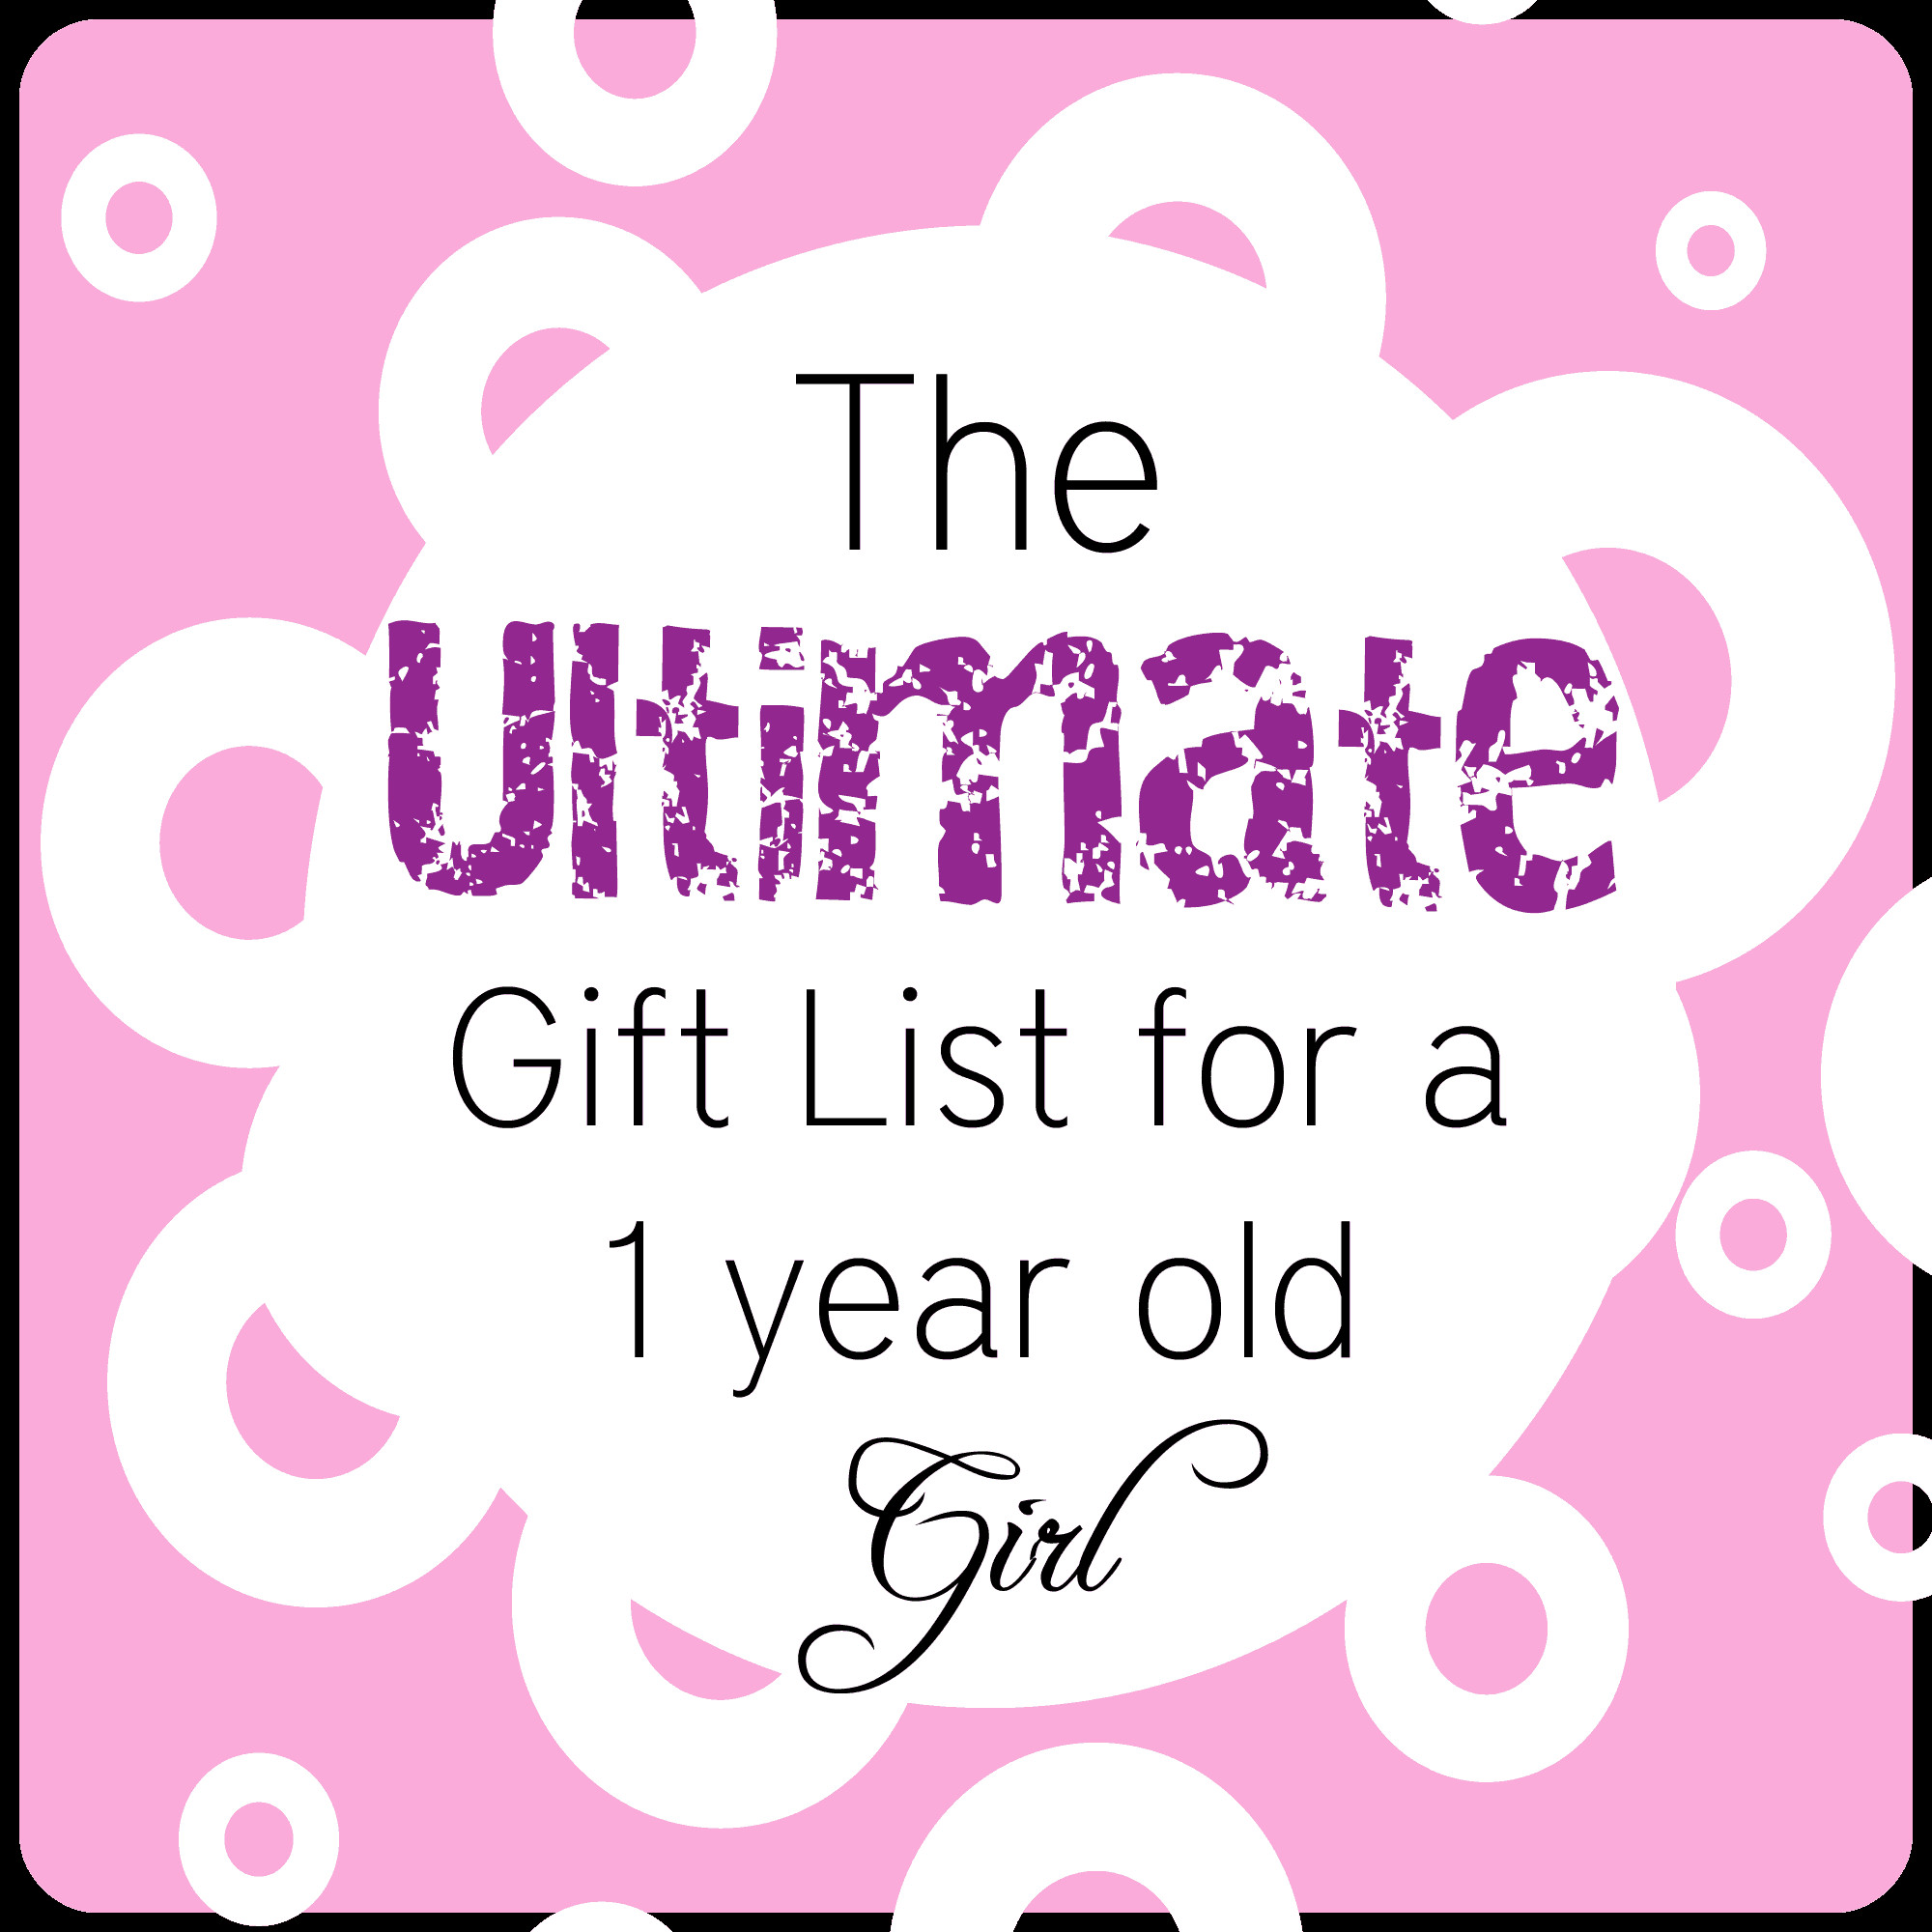 1 Year Girl Birthday Gift Ideas
 BEST Gifts for a 1 Year Old Girl • The Pinning Mama